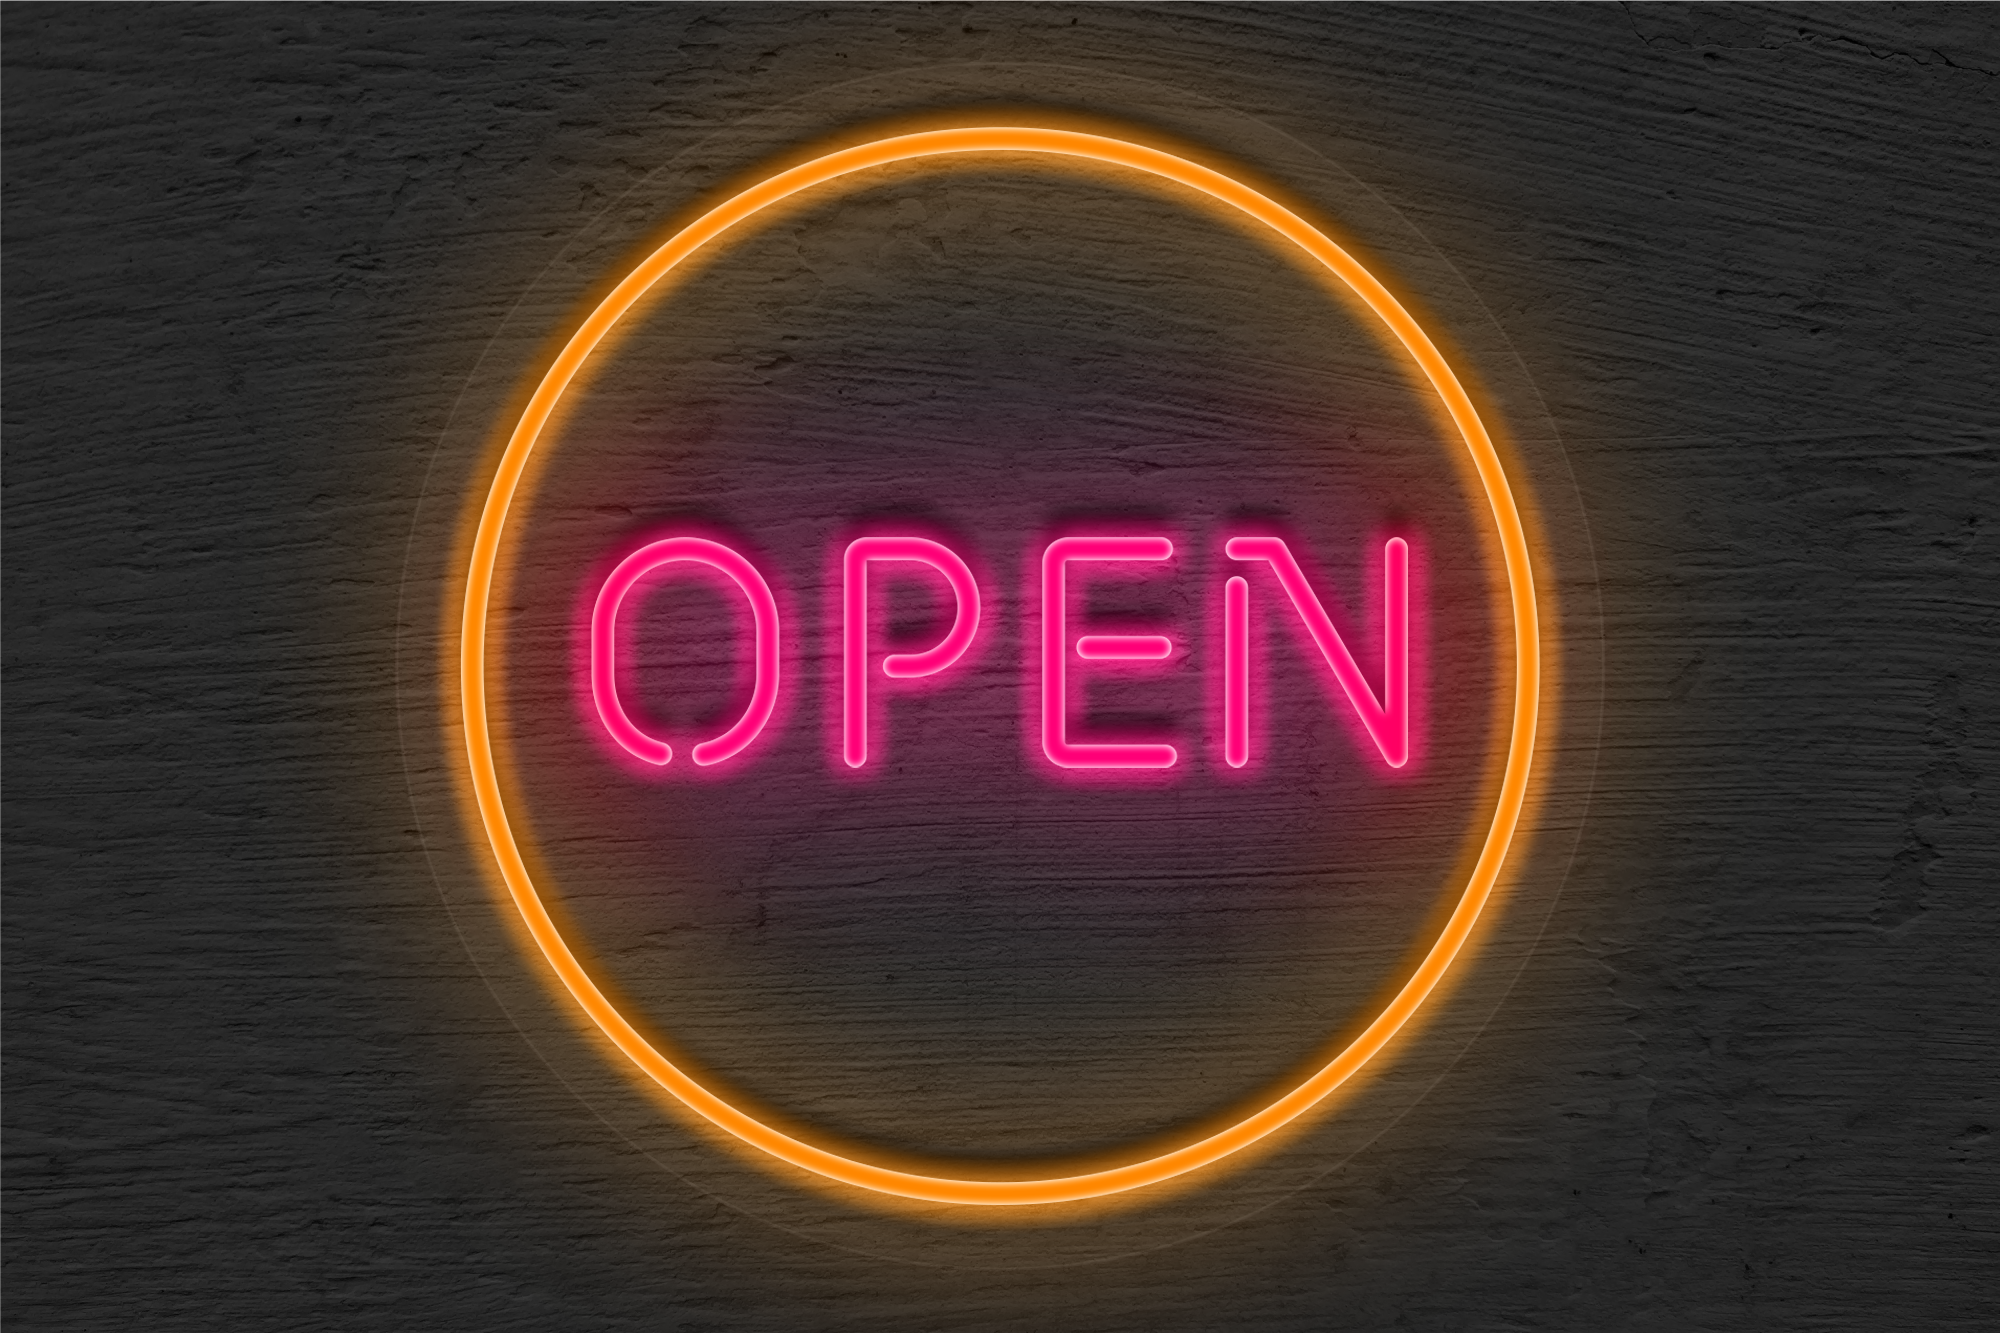 "Open" with Circle Border LED Neon Sign